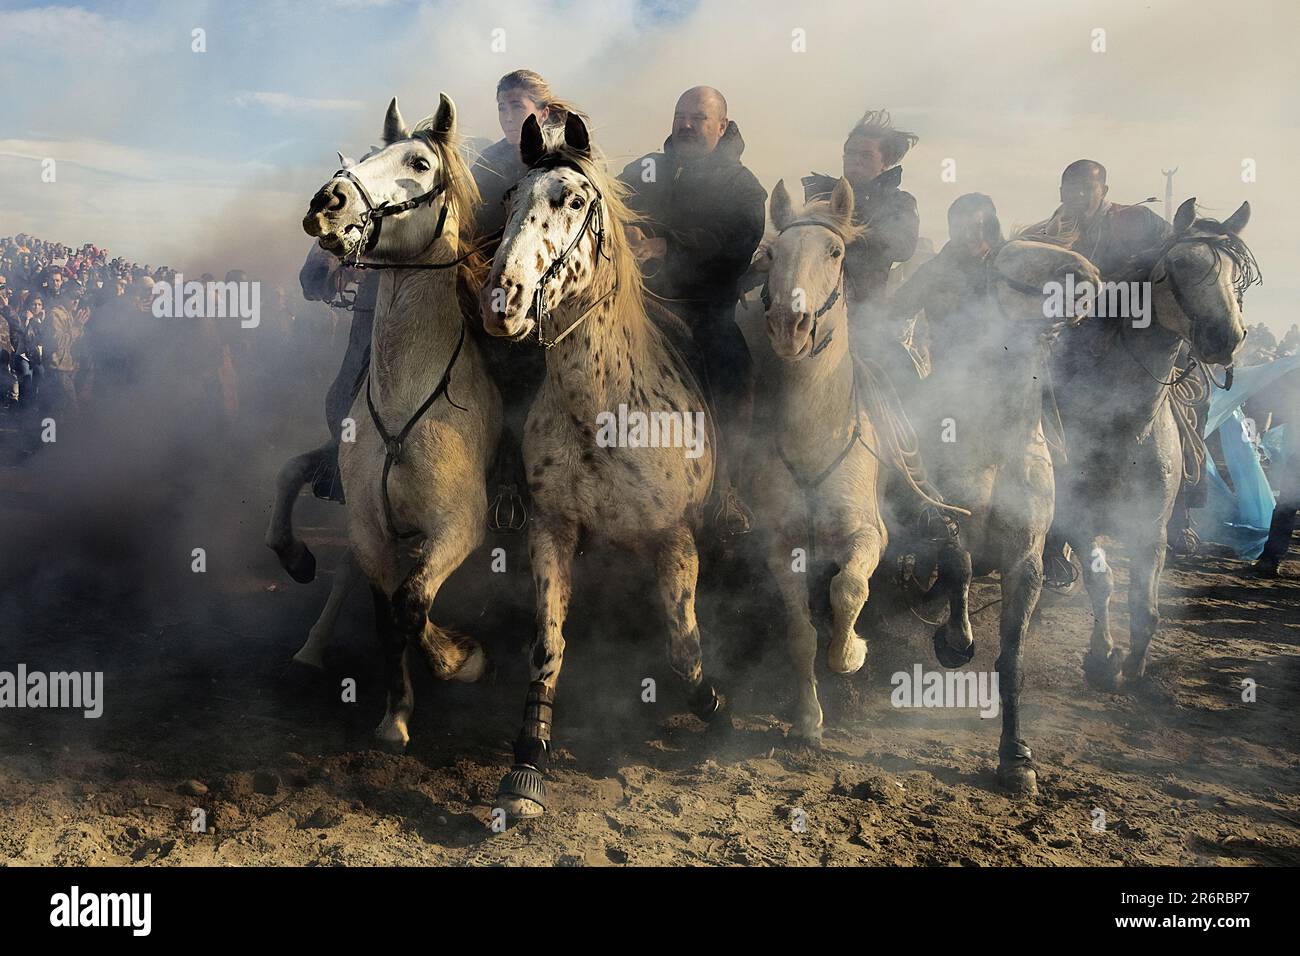 Abrivado, historical reenactment in the Camargue, France, Europe Stock Photo